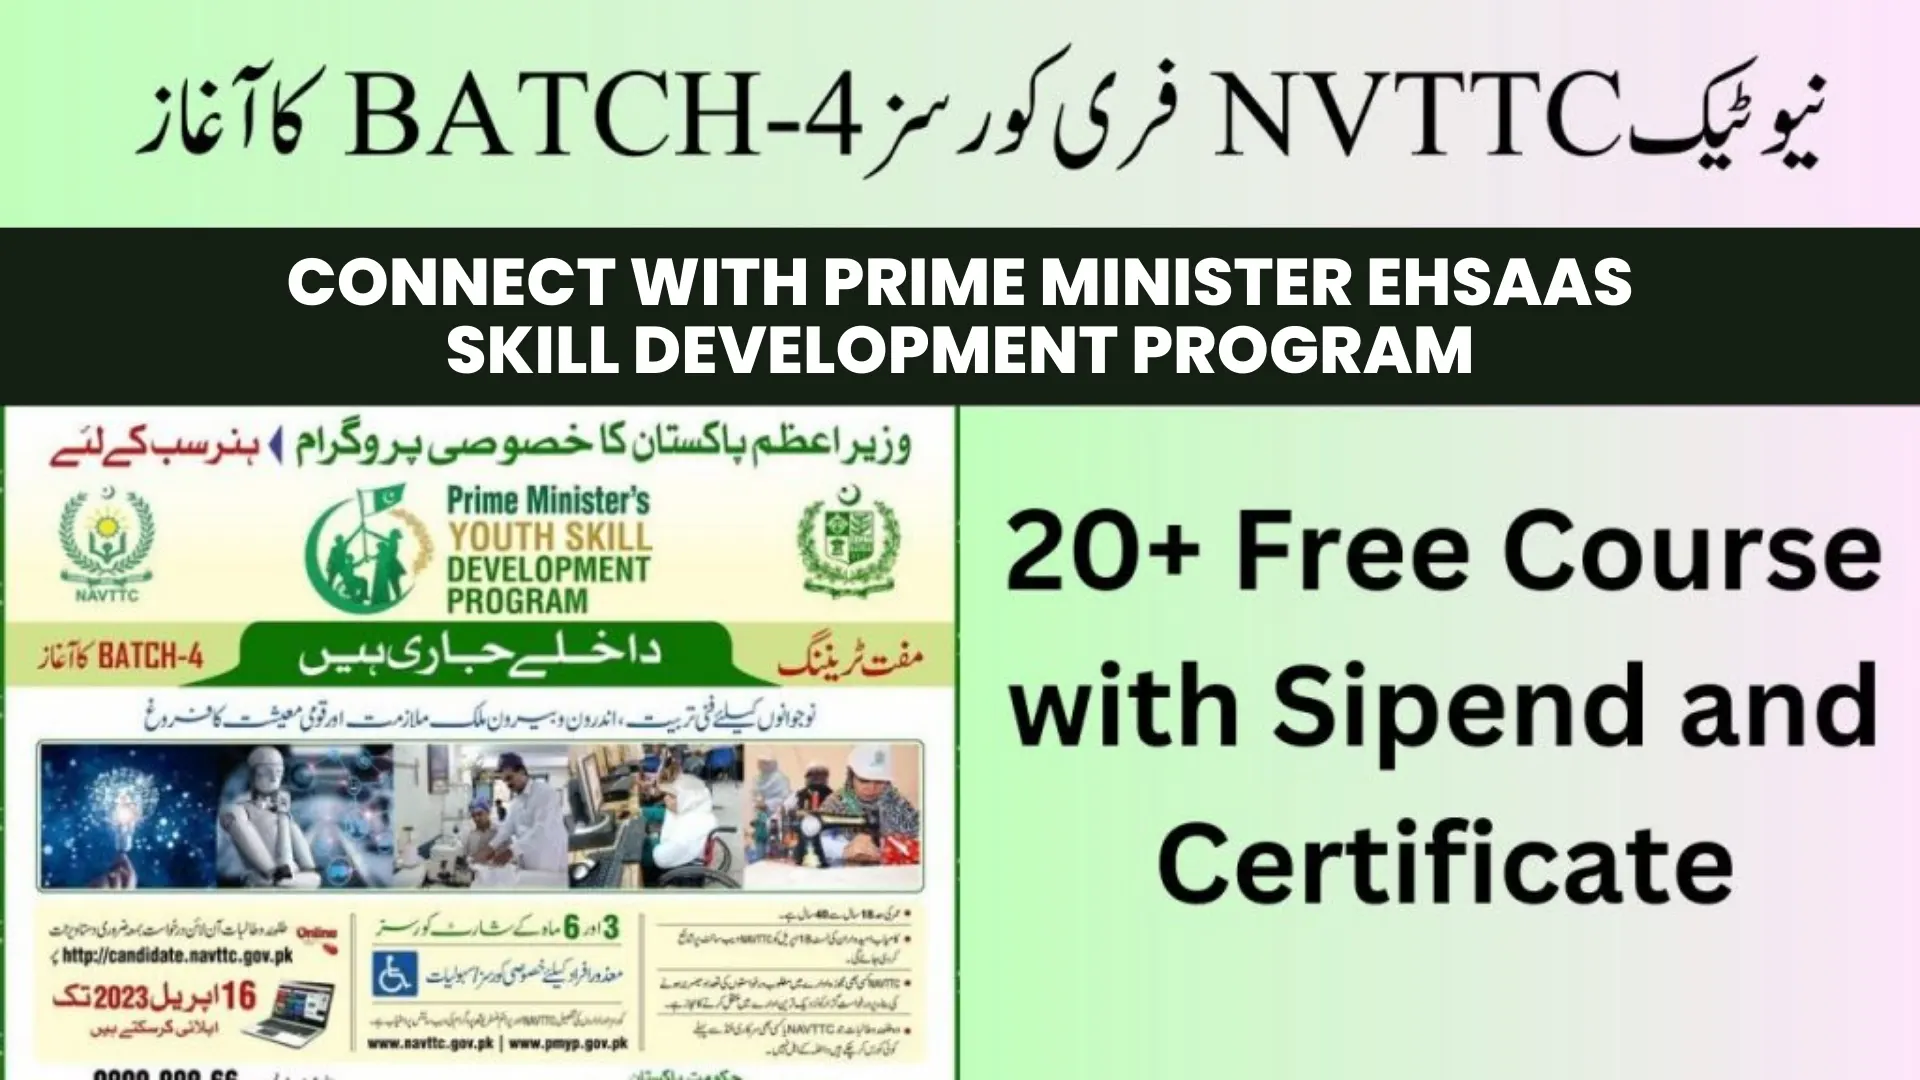 Connect with Prime Minister Ehsaas Skill Development Program